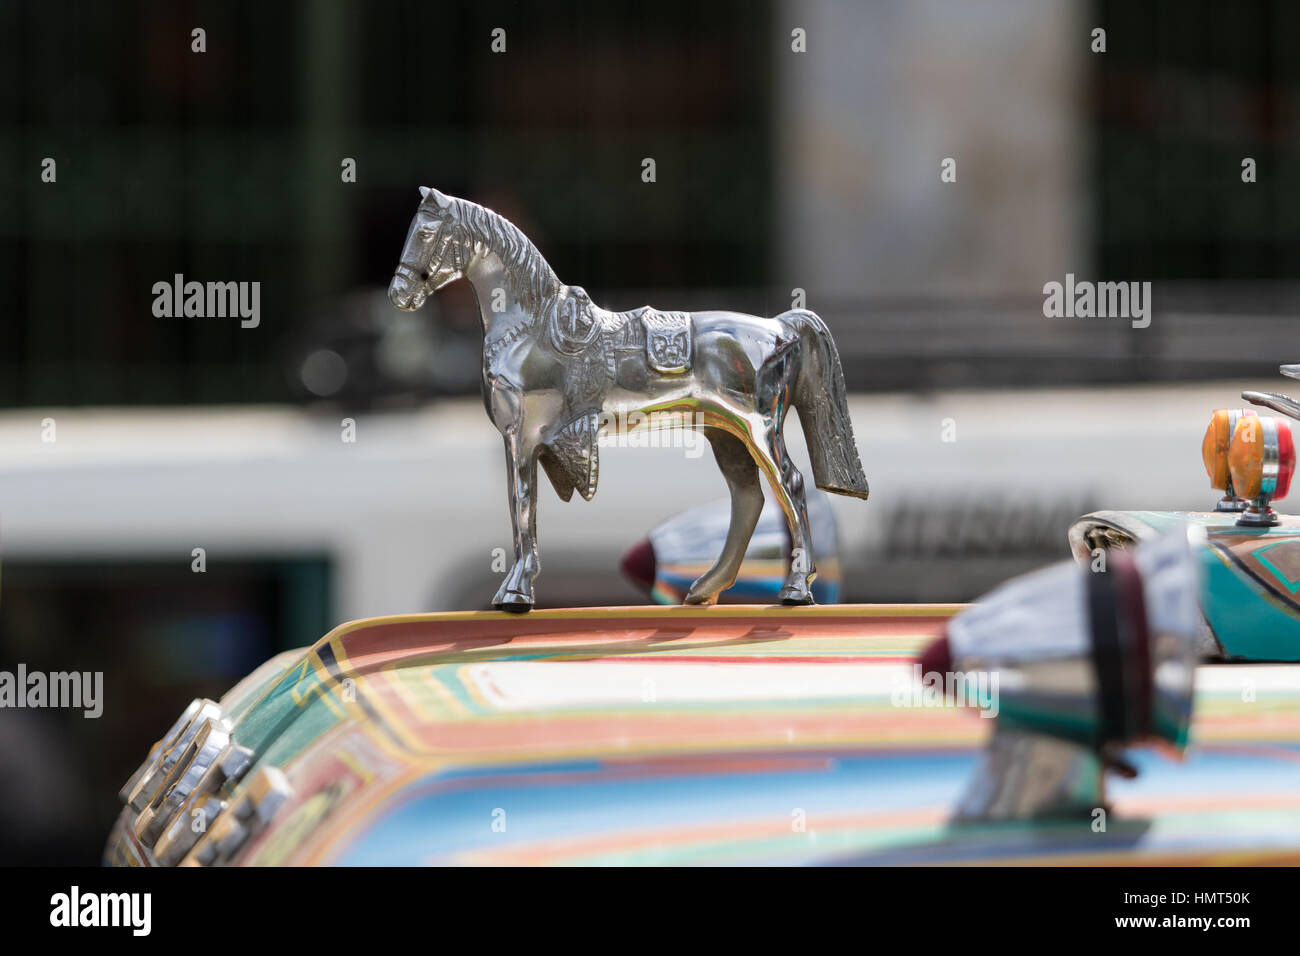 September 6, 2016 Silvia, Colombia: horse symbol on top of a bus, public transportation Stock Photo